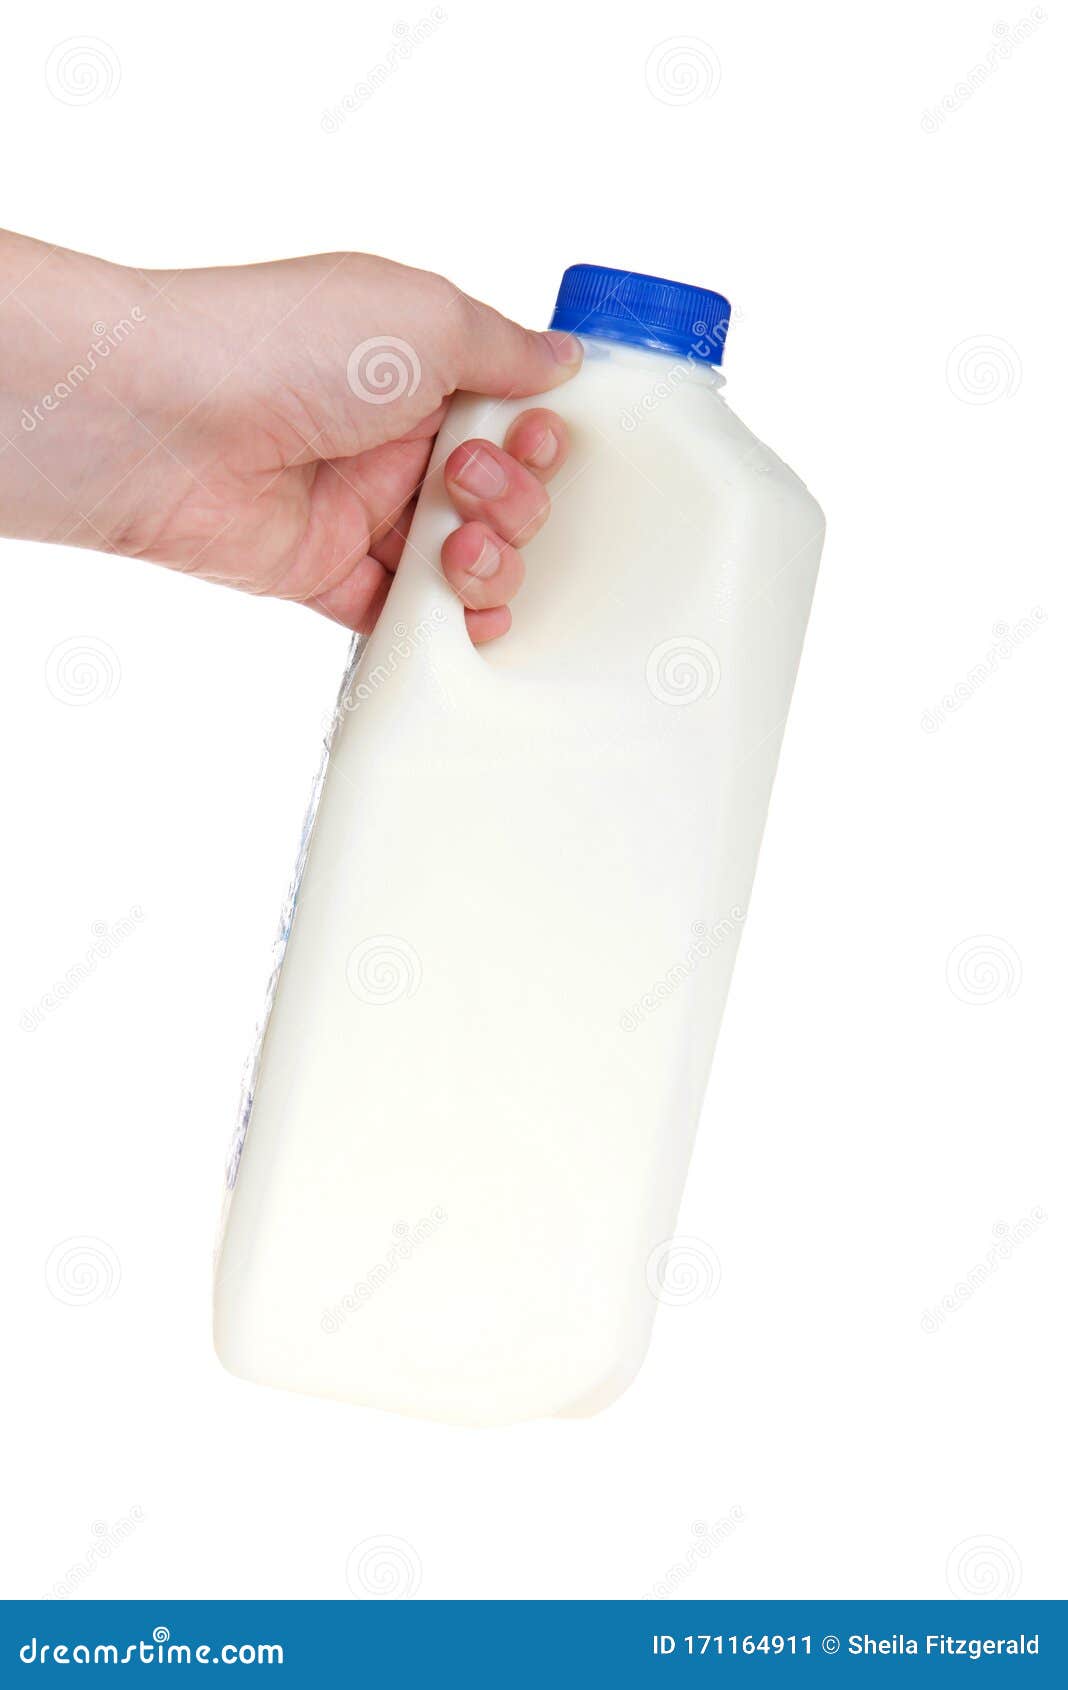 https://thumbs.dreamstime.com/z/hand-holding-half-gallon-milk-isolated-young-caucasian-hand-holding-half-gallon-bottle-milk-isolated-white-background-171164911.jpg